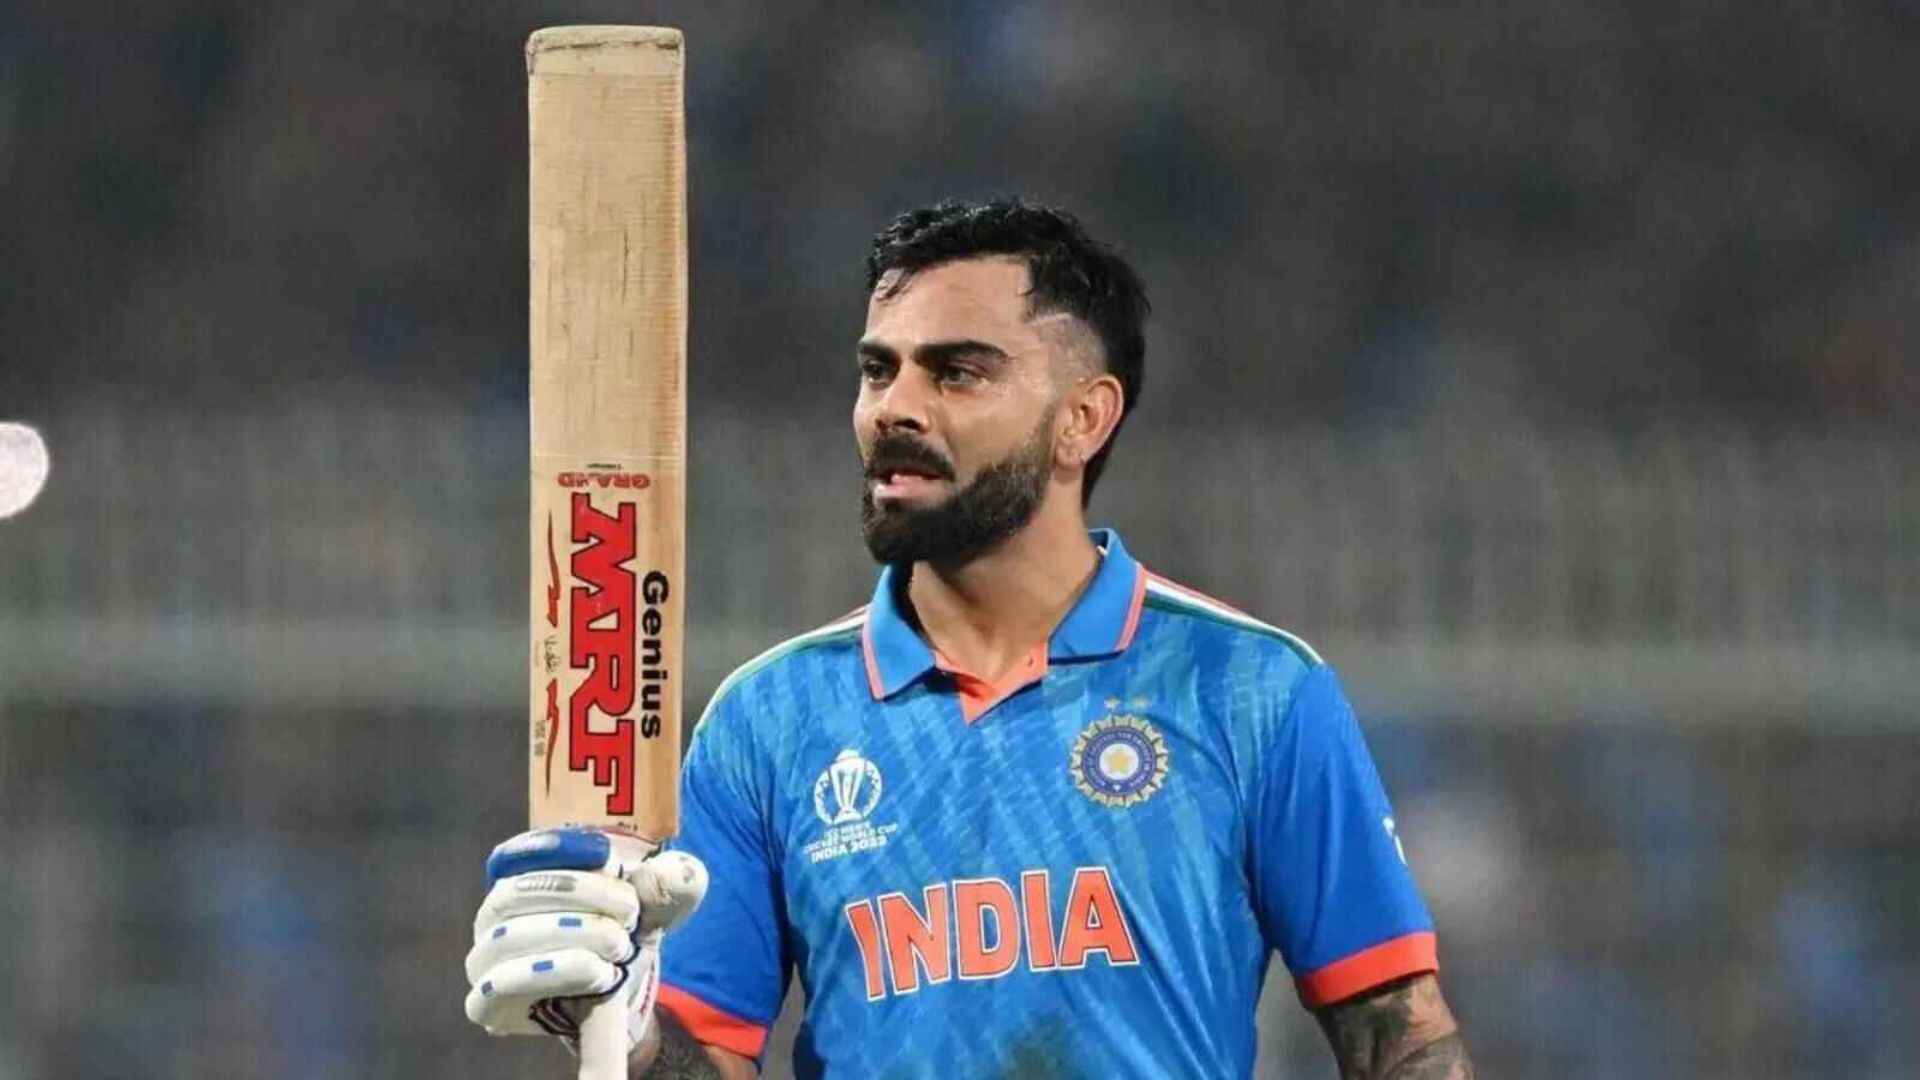 Virat Kohli Relives T20 Glory, Only To Be Outdone By Rashid Khan In Super 8 Clash